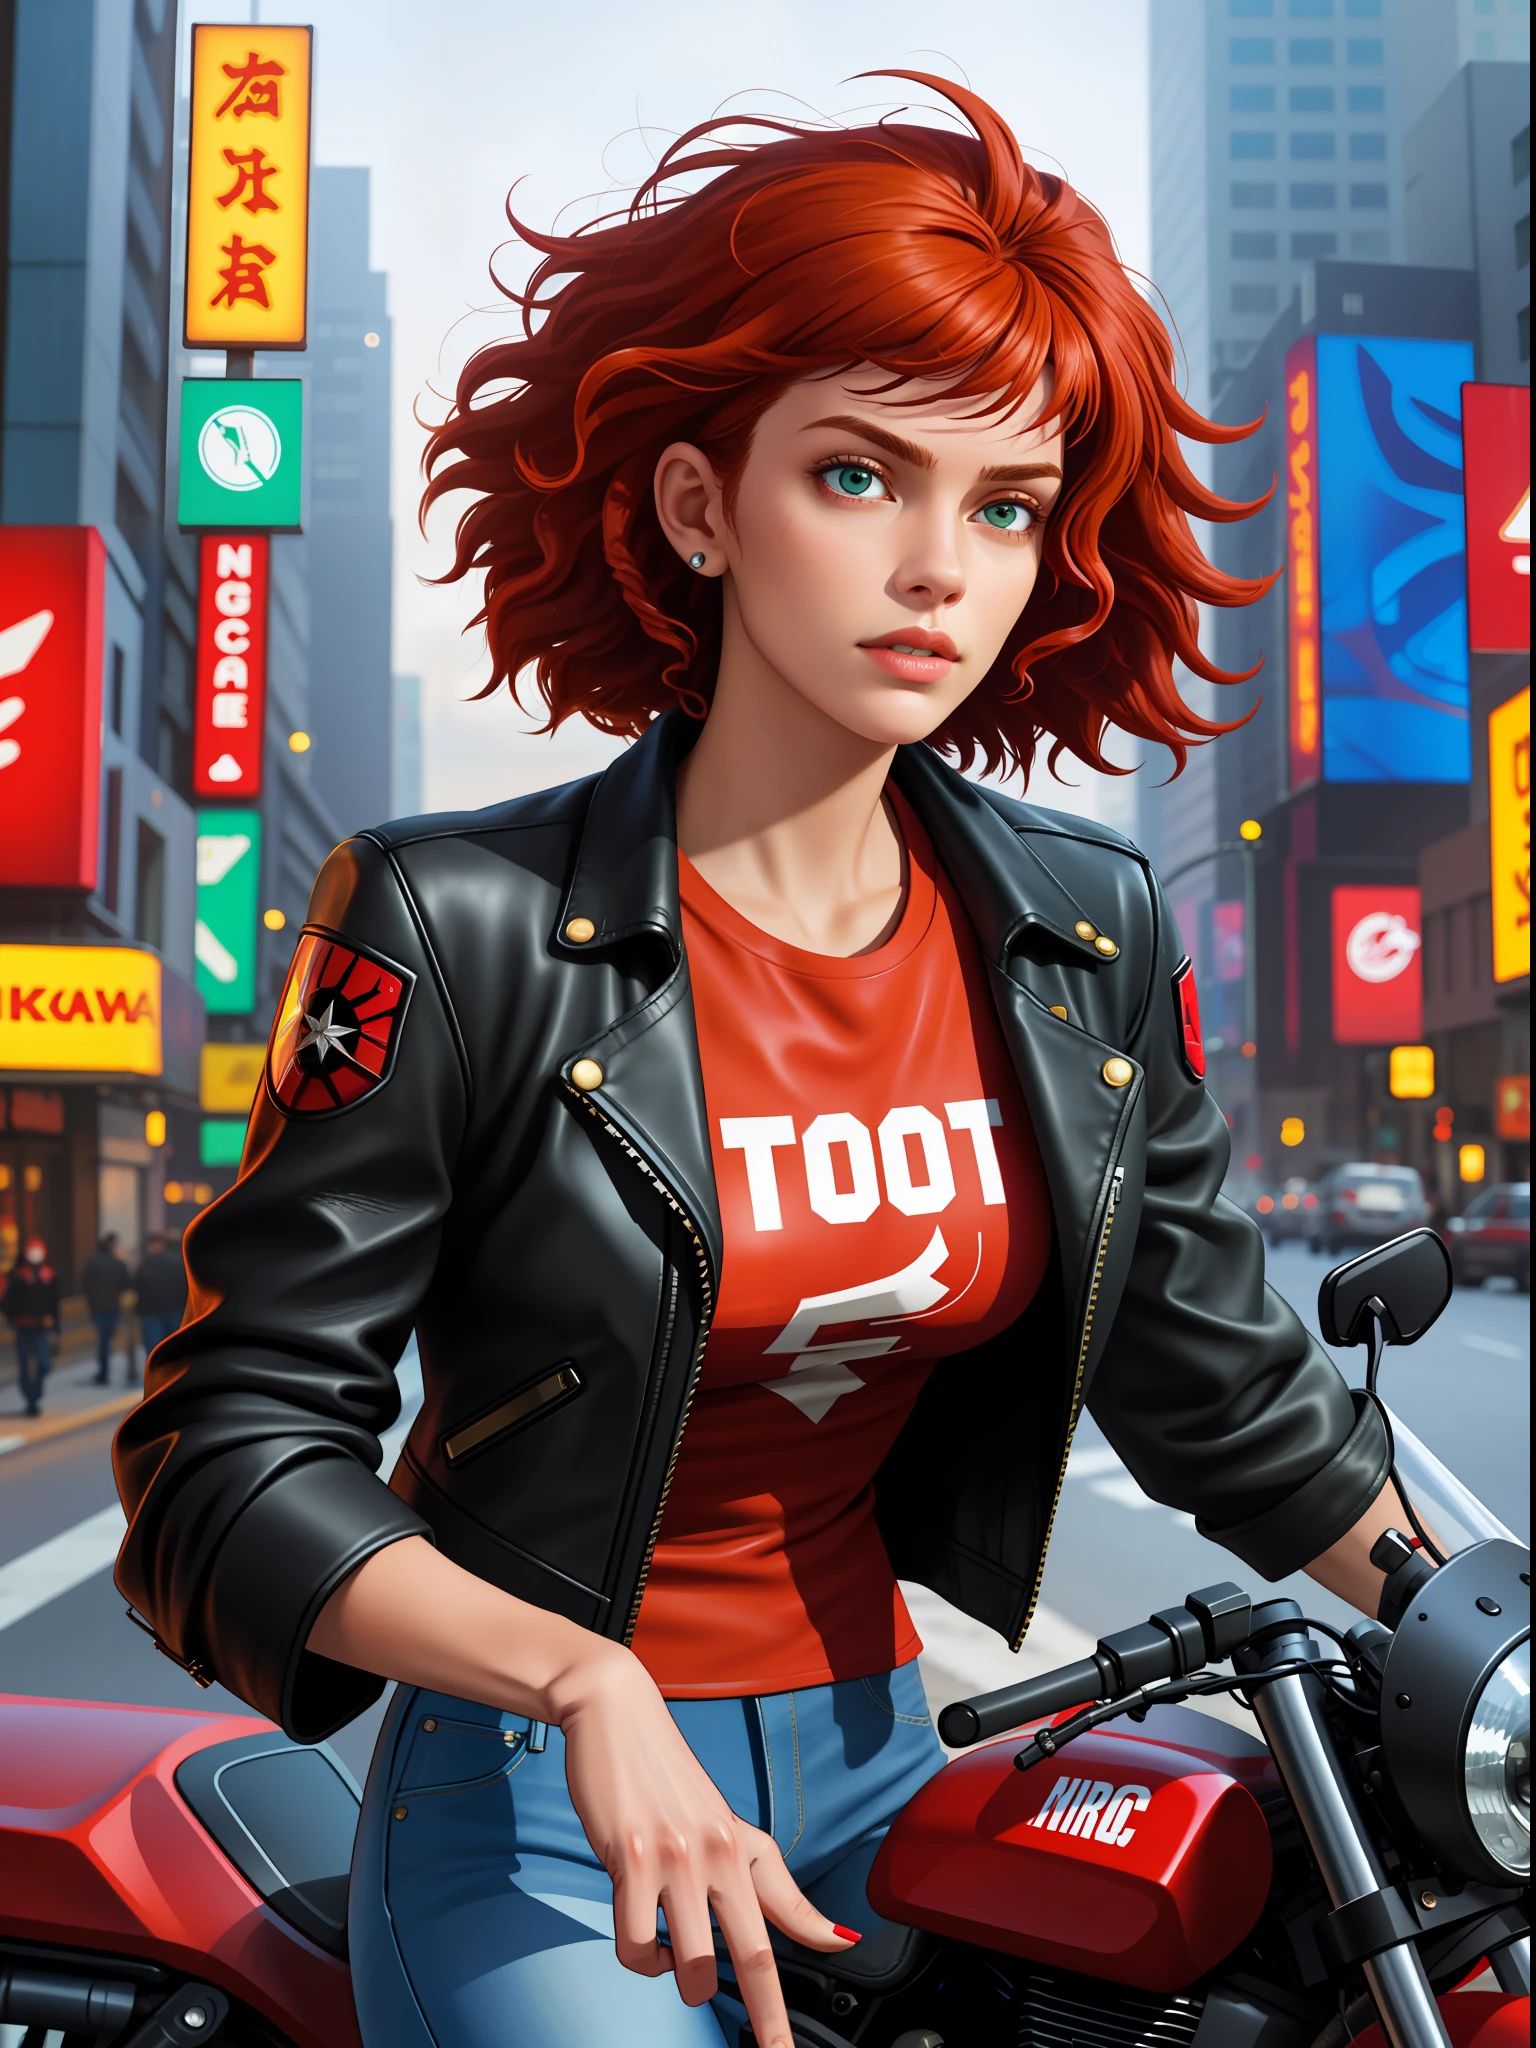 masterpiece, best quality, high quality, realistic, detailed lips, detailed face, detailed eyes, 1girl, leather jacket, red t-shirt, jeans, neon lights, cyberpunk, cyberpunk, riding motorcycle, punk curly hair, red hair, short hair, hair blowing in wind, moving fast, city road, realistic, detailed face, detailed skin, detailed lips, masterpiece, high quality,